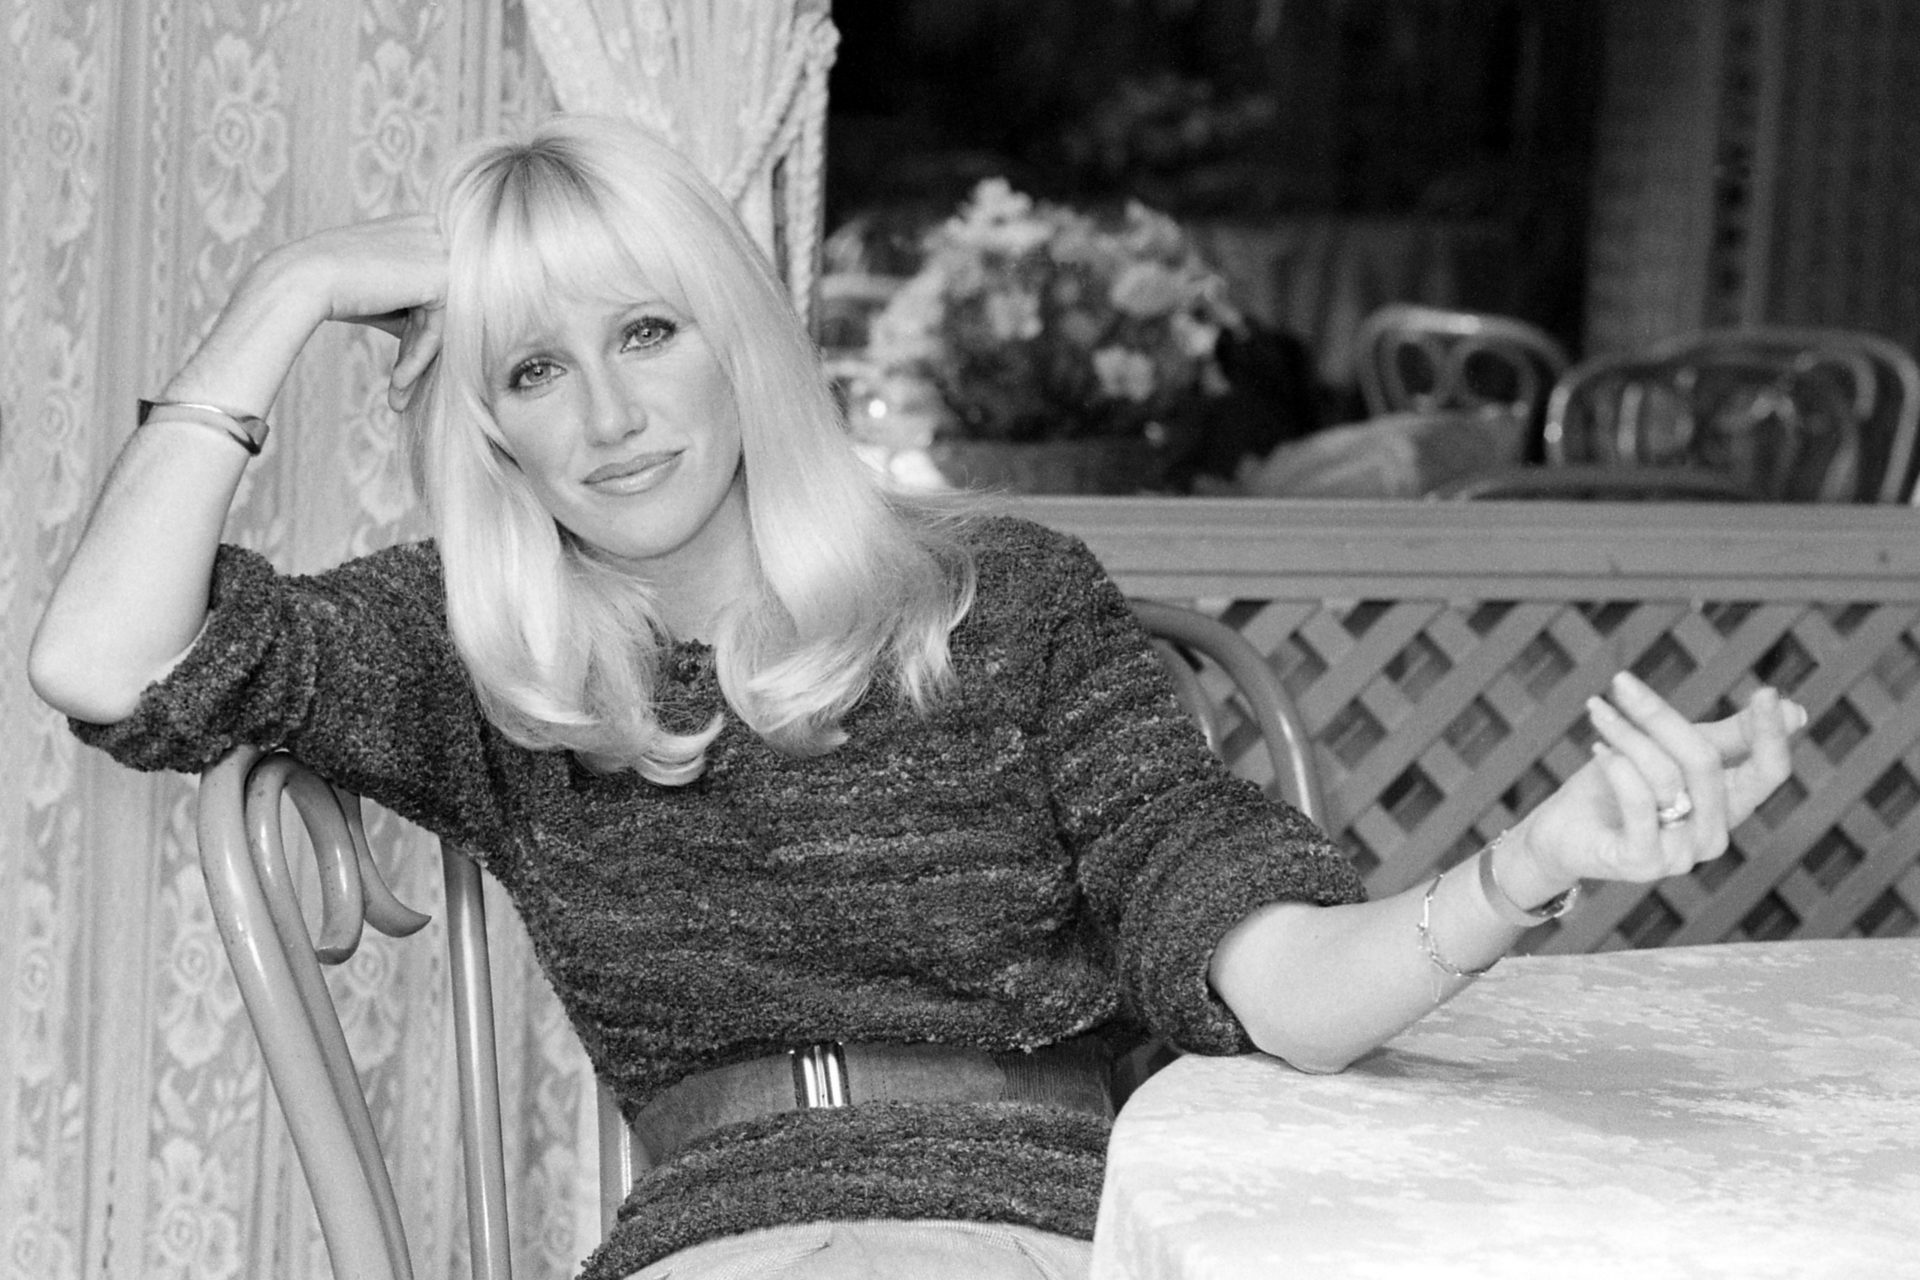 Suzanne Somers began her career in the 1970s